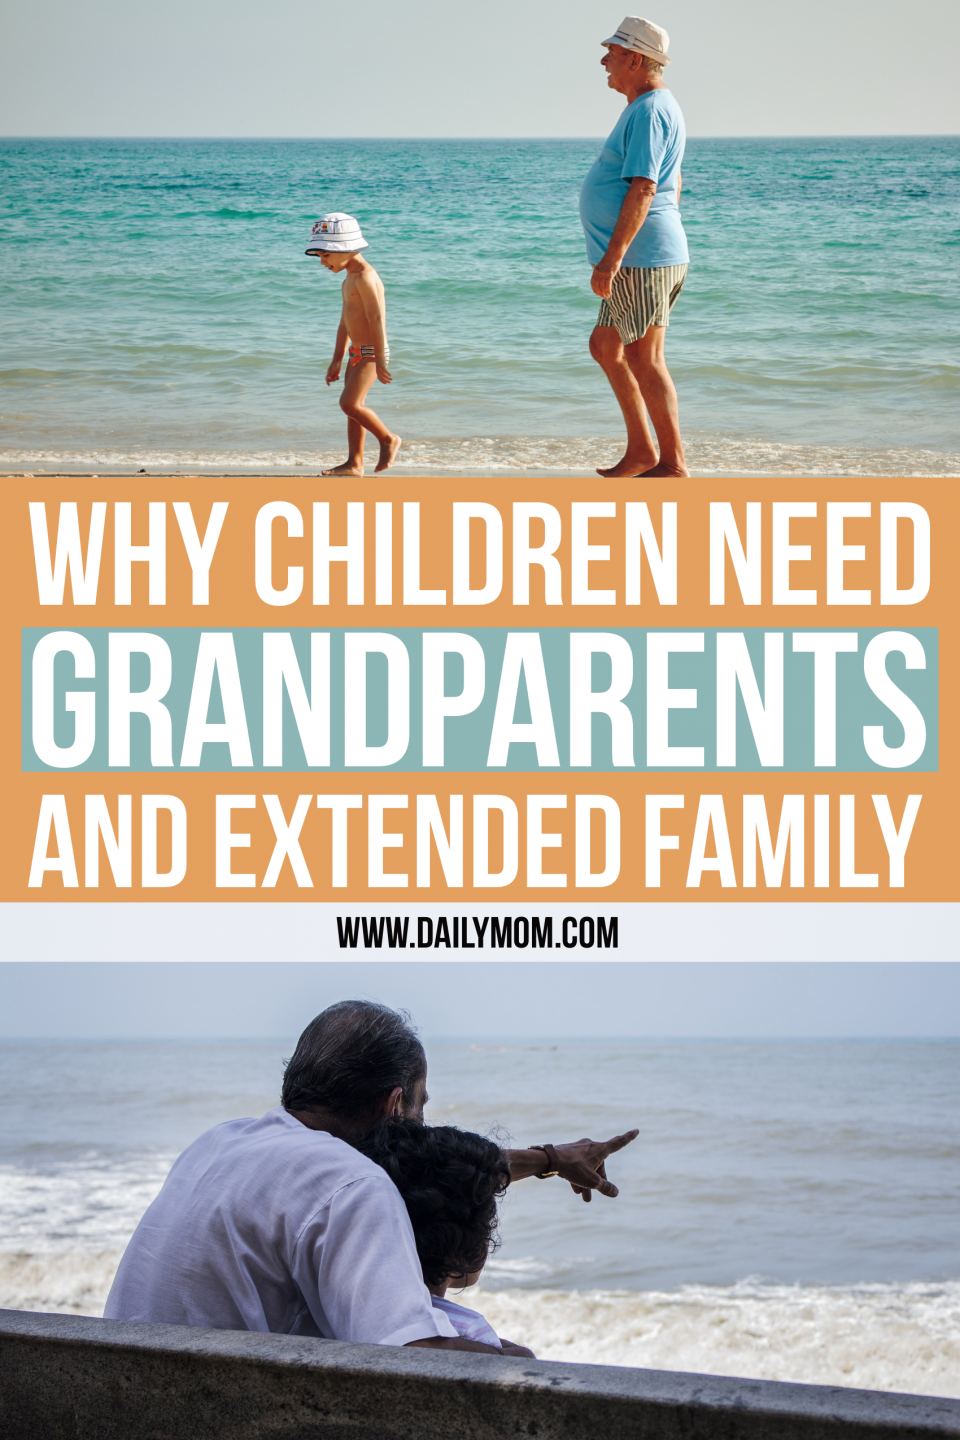 Daily Mom Oarent Portal Why Children Need Grandparents 